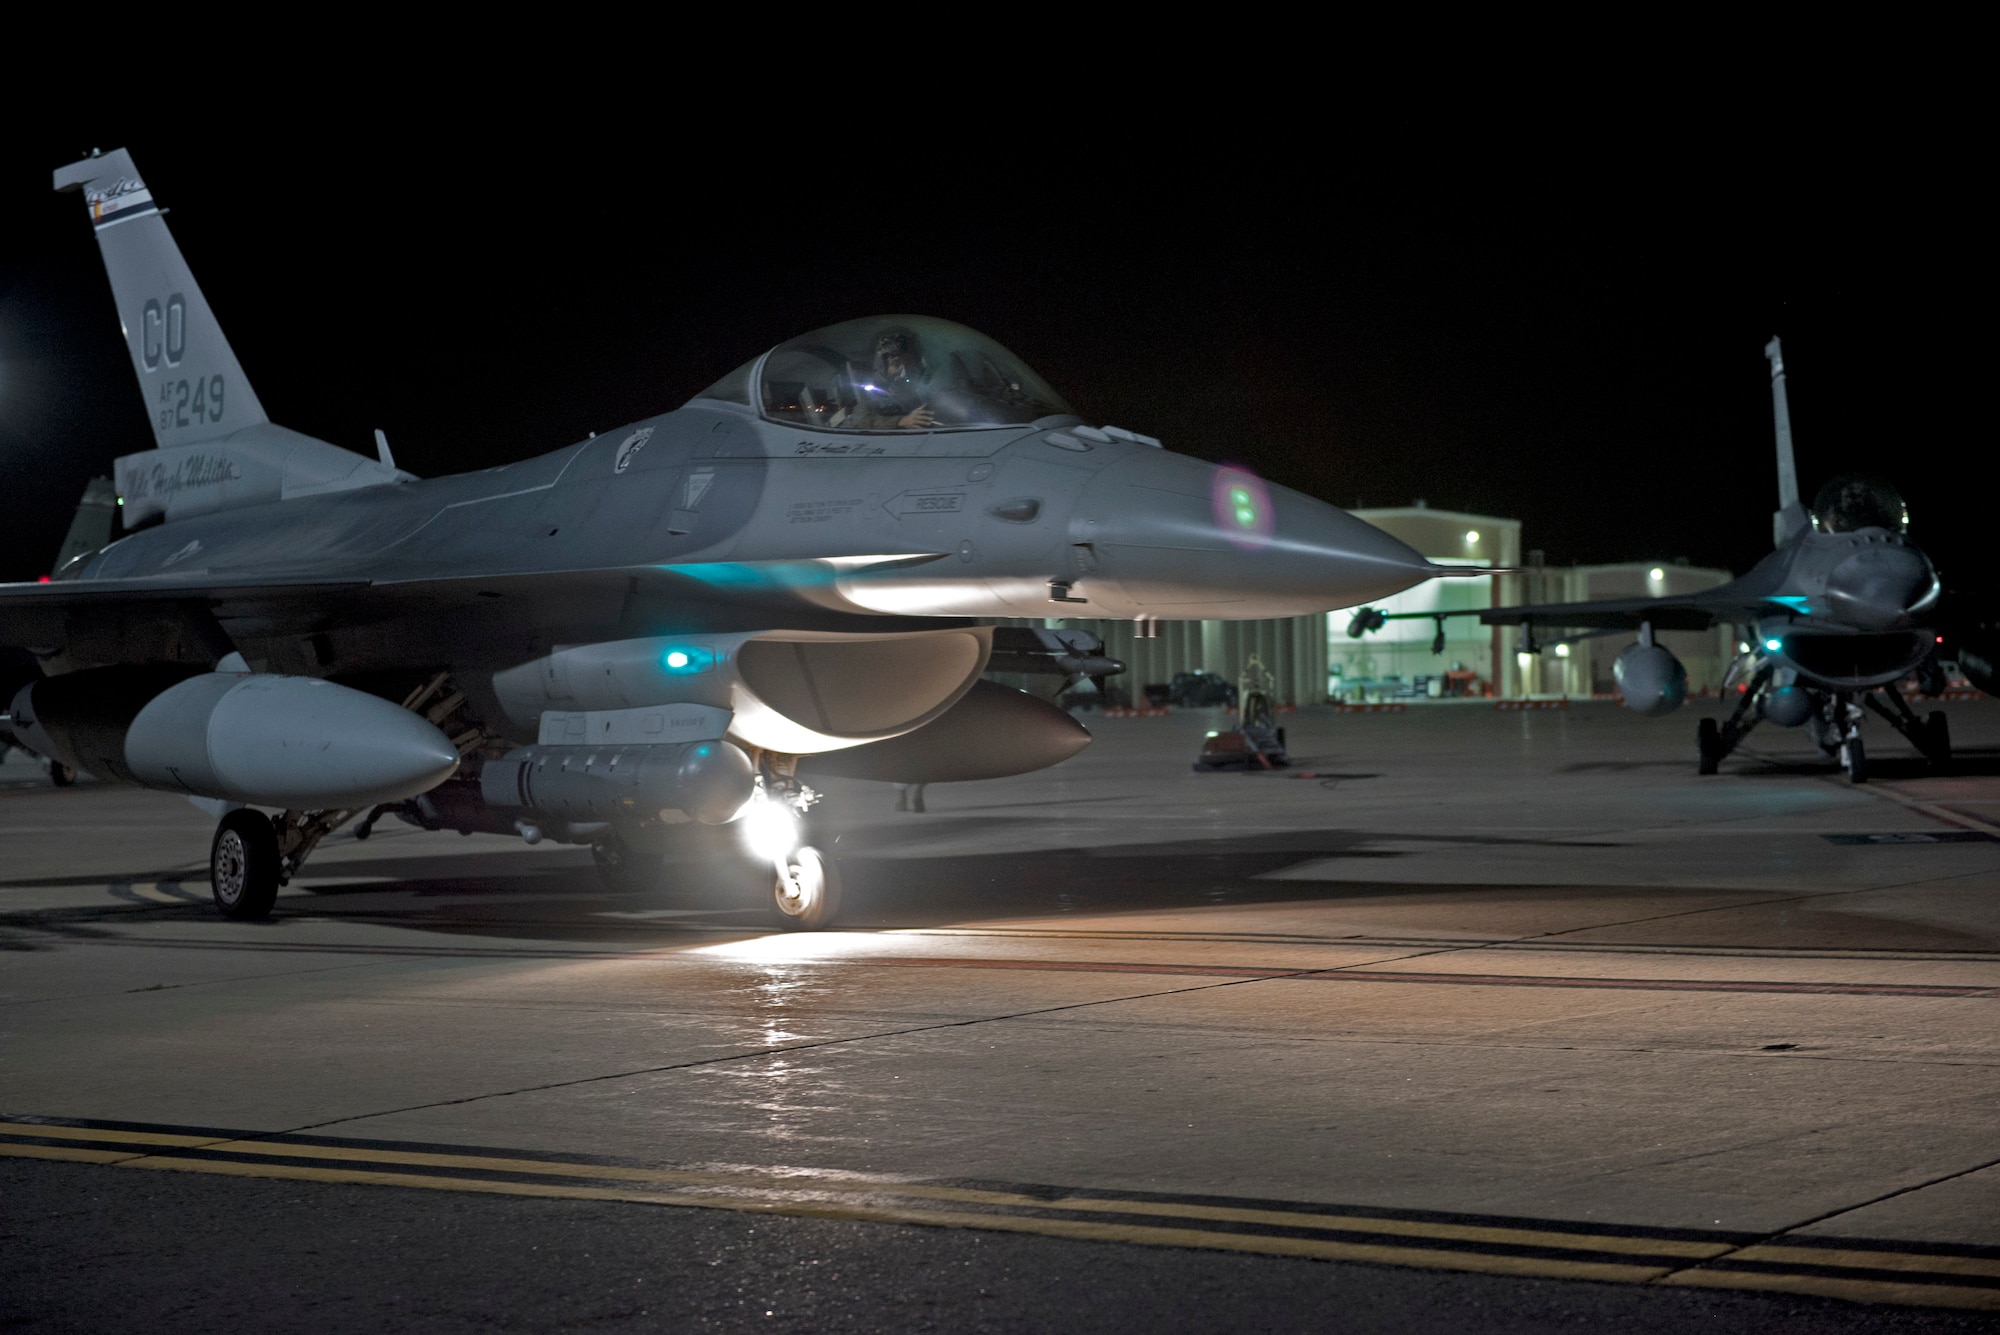 An F-16 Fighting Falcon from the 120th Fighter Squadron, Colorado Air National Guard, prepares for take off during a night mission for the Wing Wartime Readiness Inspection, Buckley Air Force Base, Colo., Oct. 16, 2015. The WWRI is a four-day inspection that tests and evaluates the 140th Wing on critical requirements to ensure mission readiness for real world deployments. (U.S. Air National Guard photo by Senior Airman Michelle Y. Alvarez-Rea)